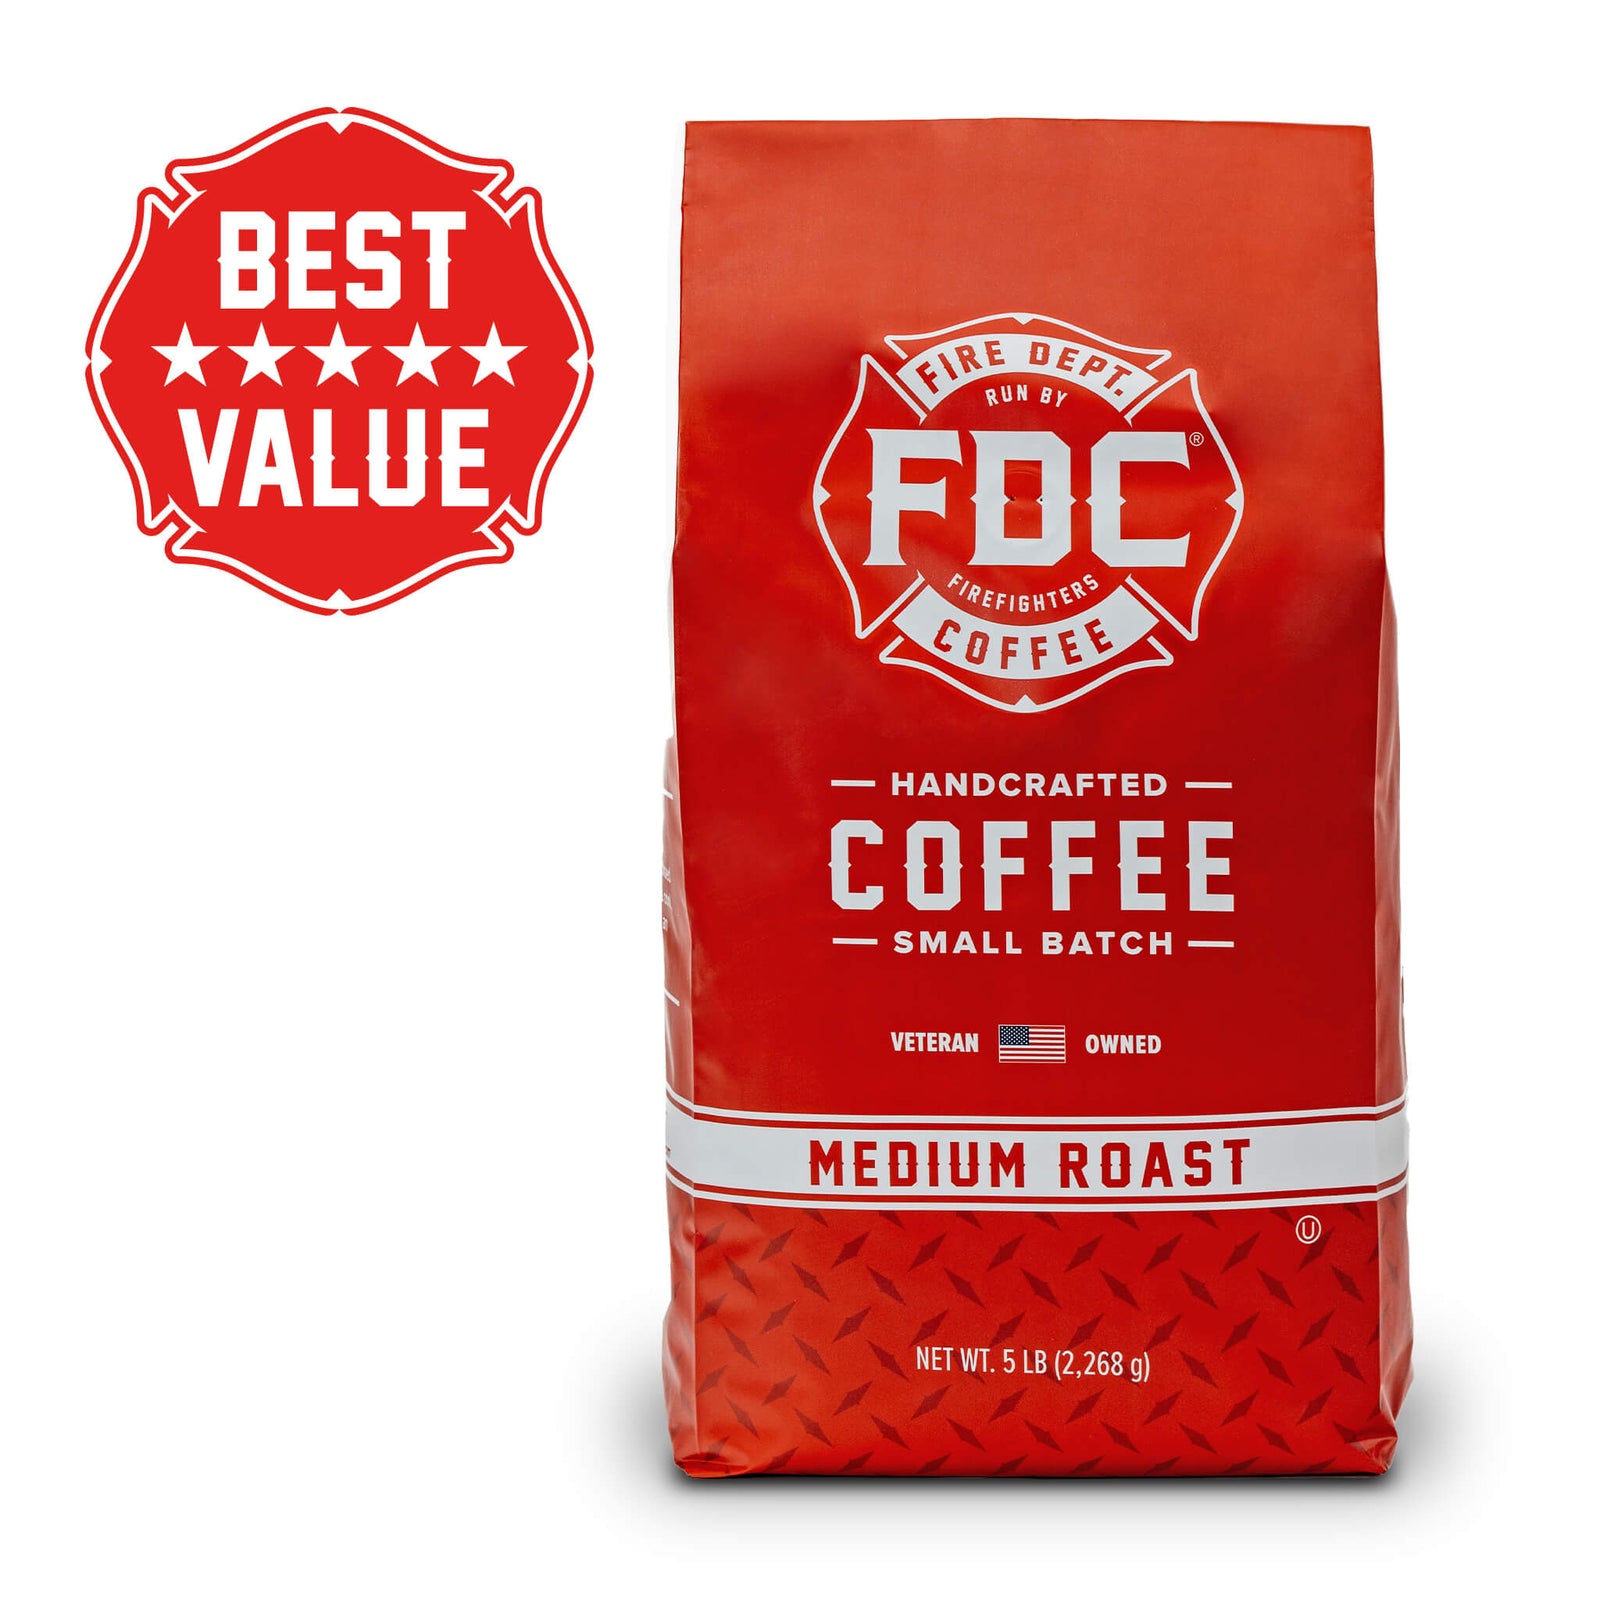 A 5lb bag of Fire Department Coffee's Original Medium Roast with a "best value" tag in the top left corner